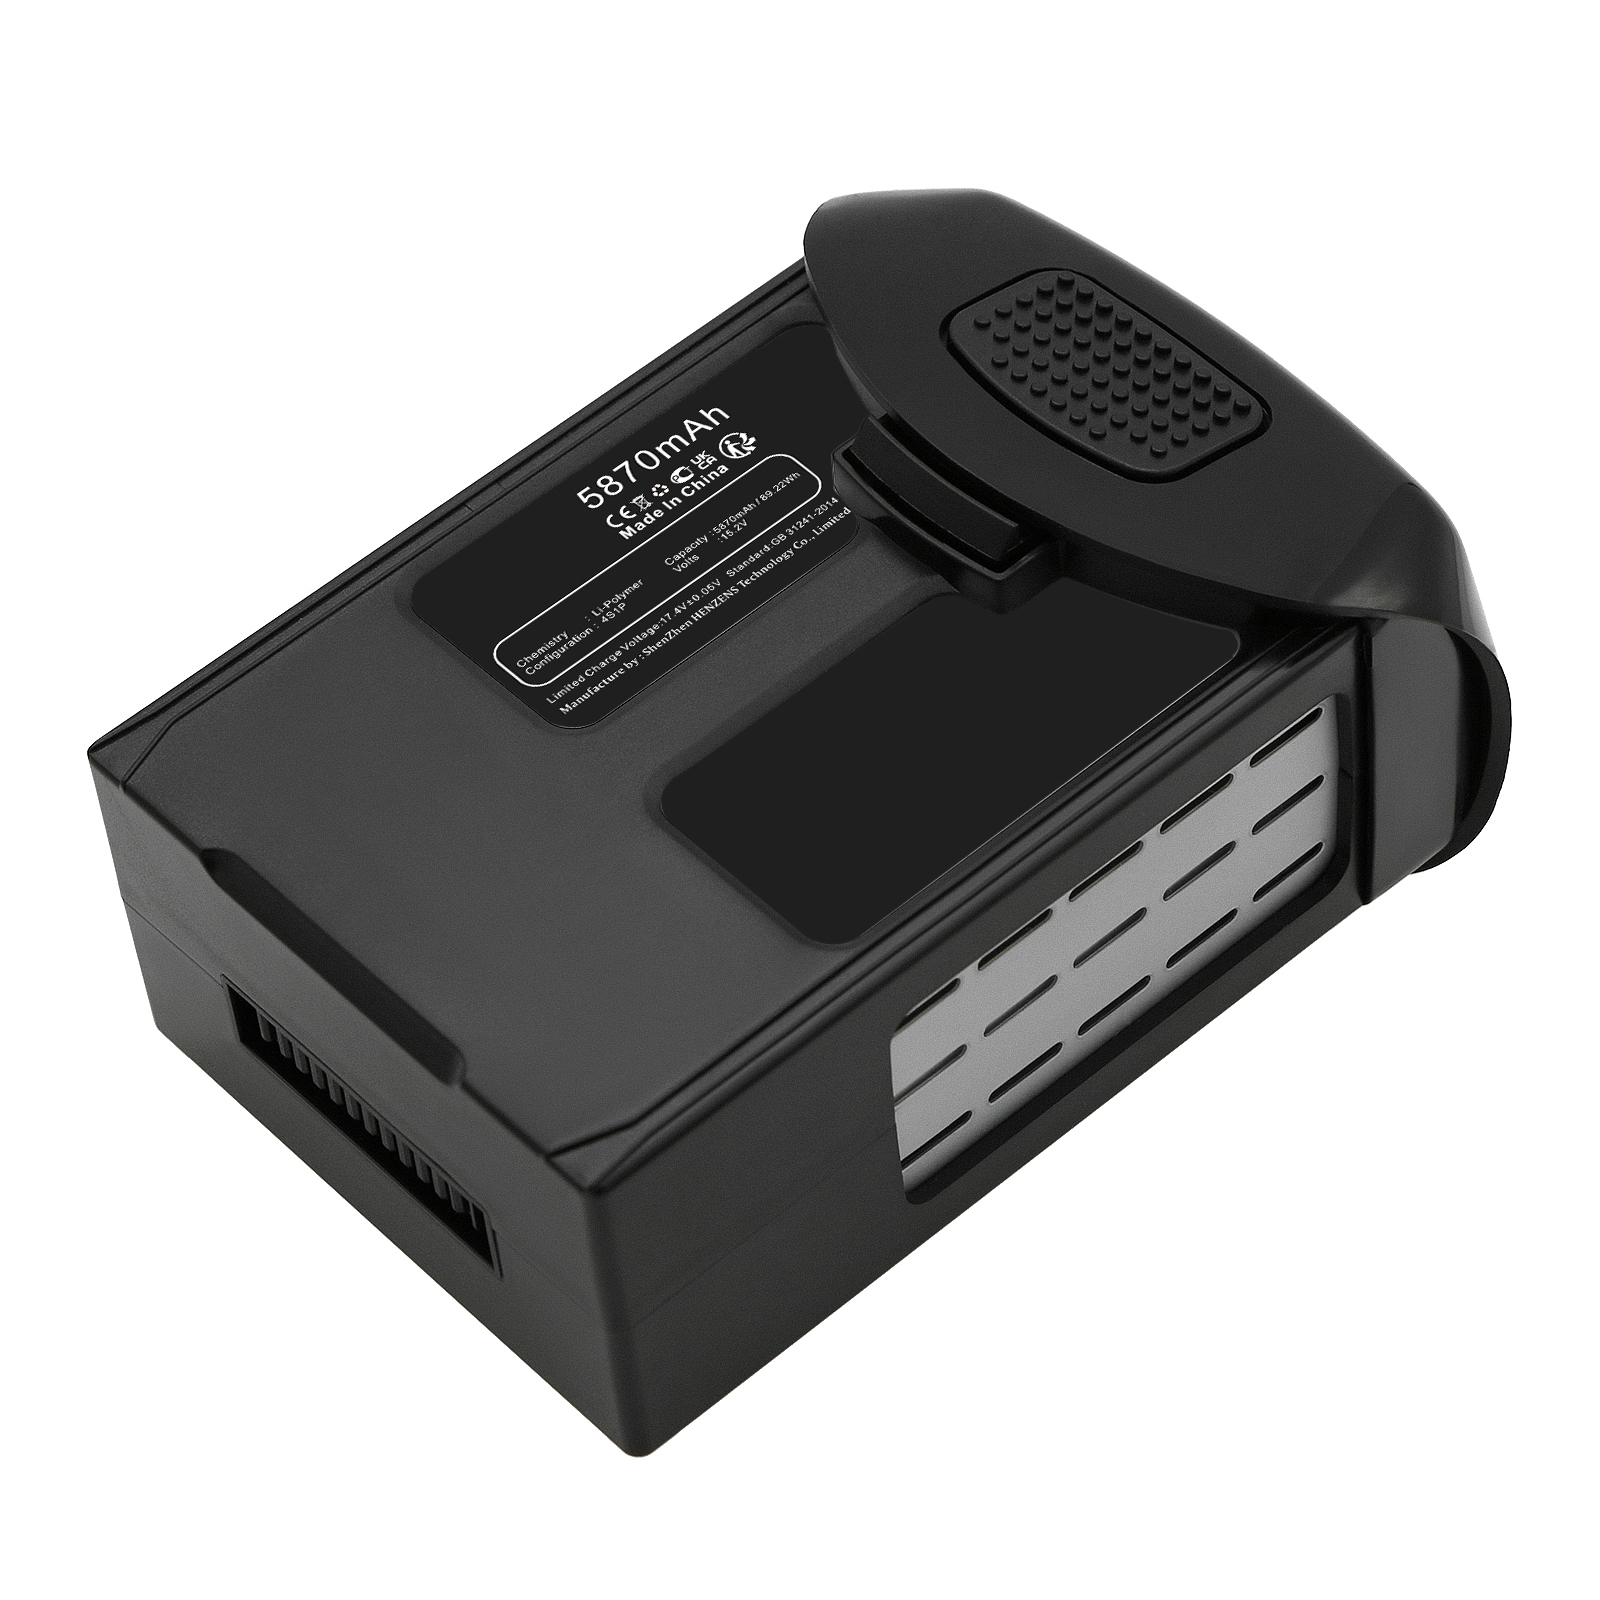 Synergy Digital Drone Battery, Compatible with DJI CP.PT.00000033.01 Drone Battery (Li-Pol, 15.2V, 5870mAh)